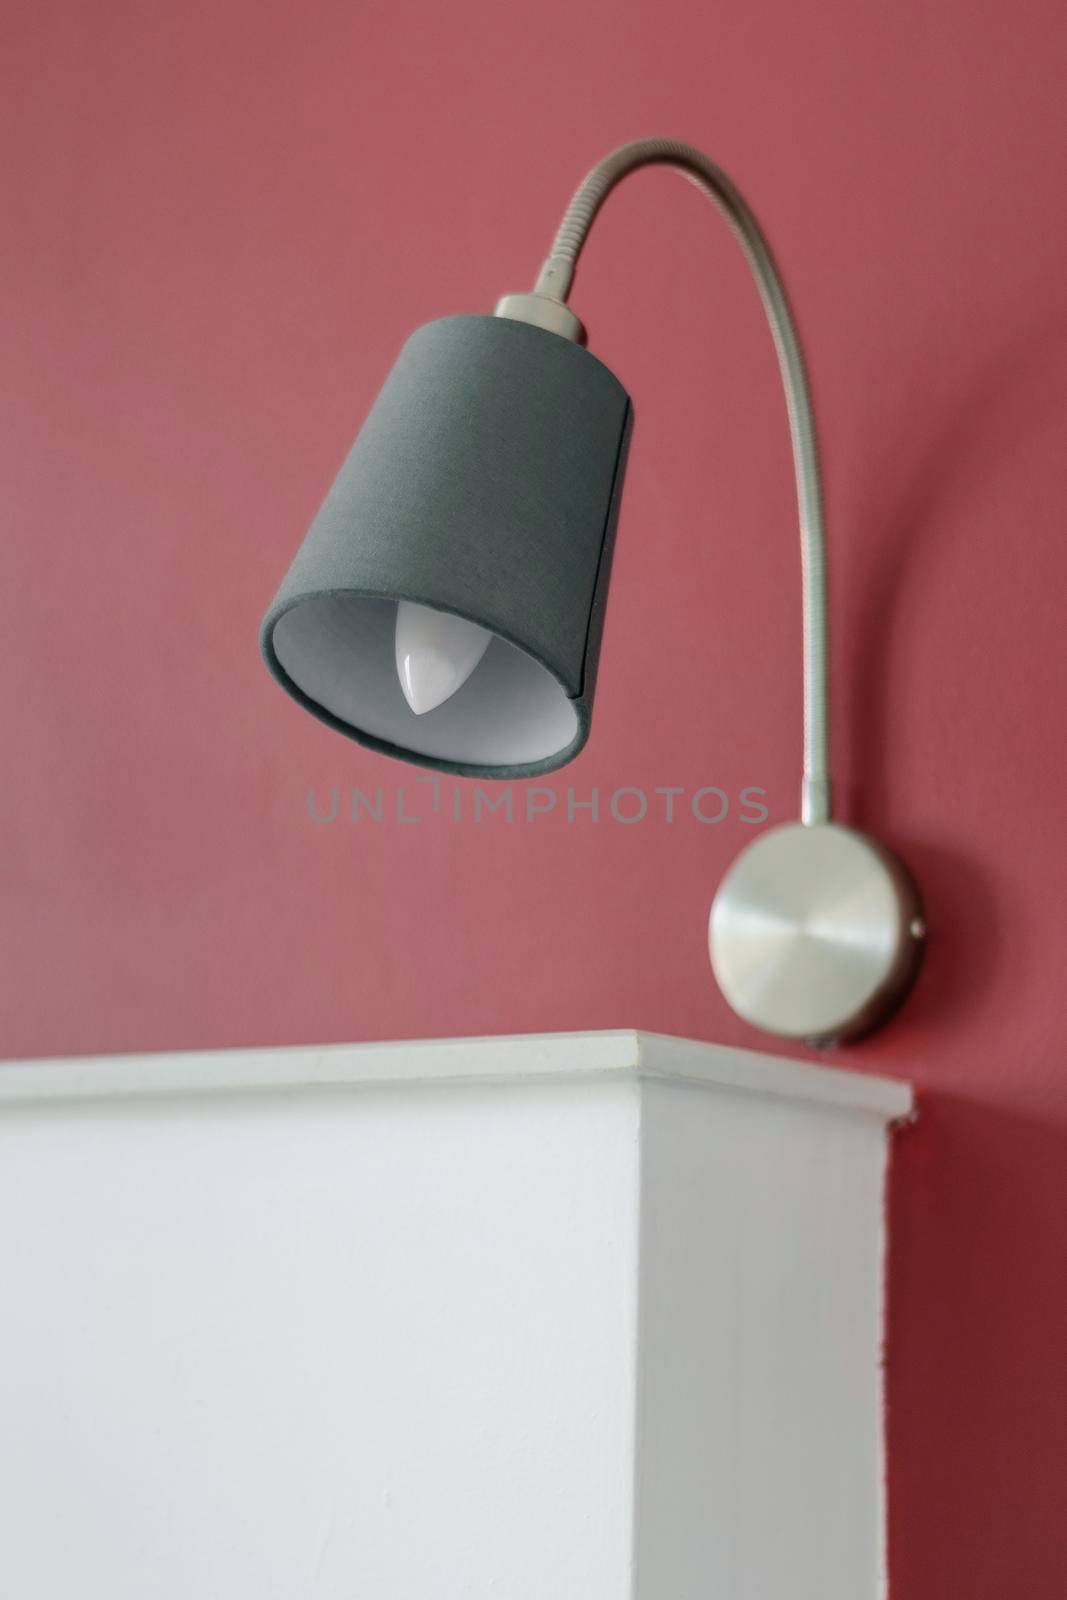 modern design bed lamps detail in contemporary bedroom interior at daytime